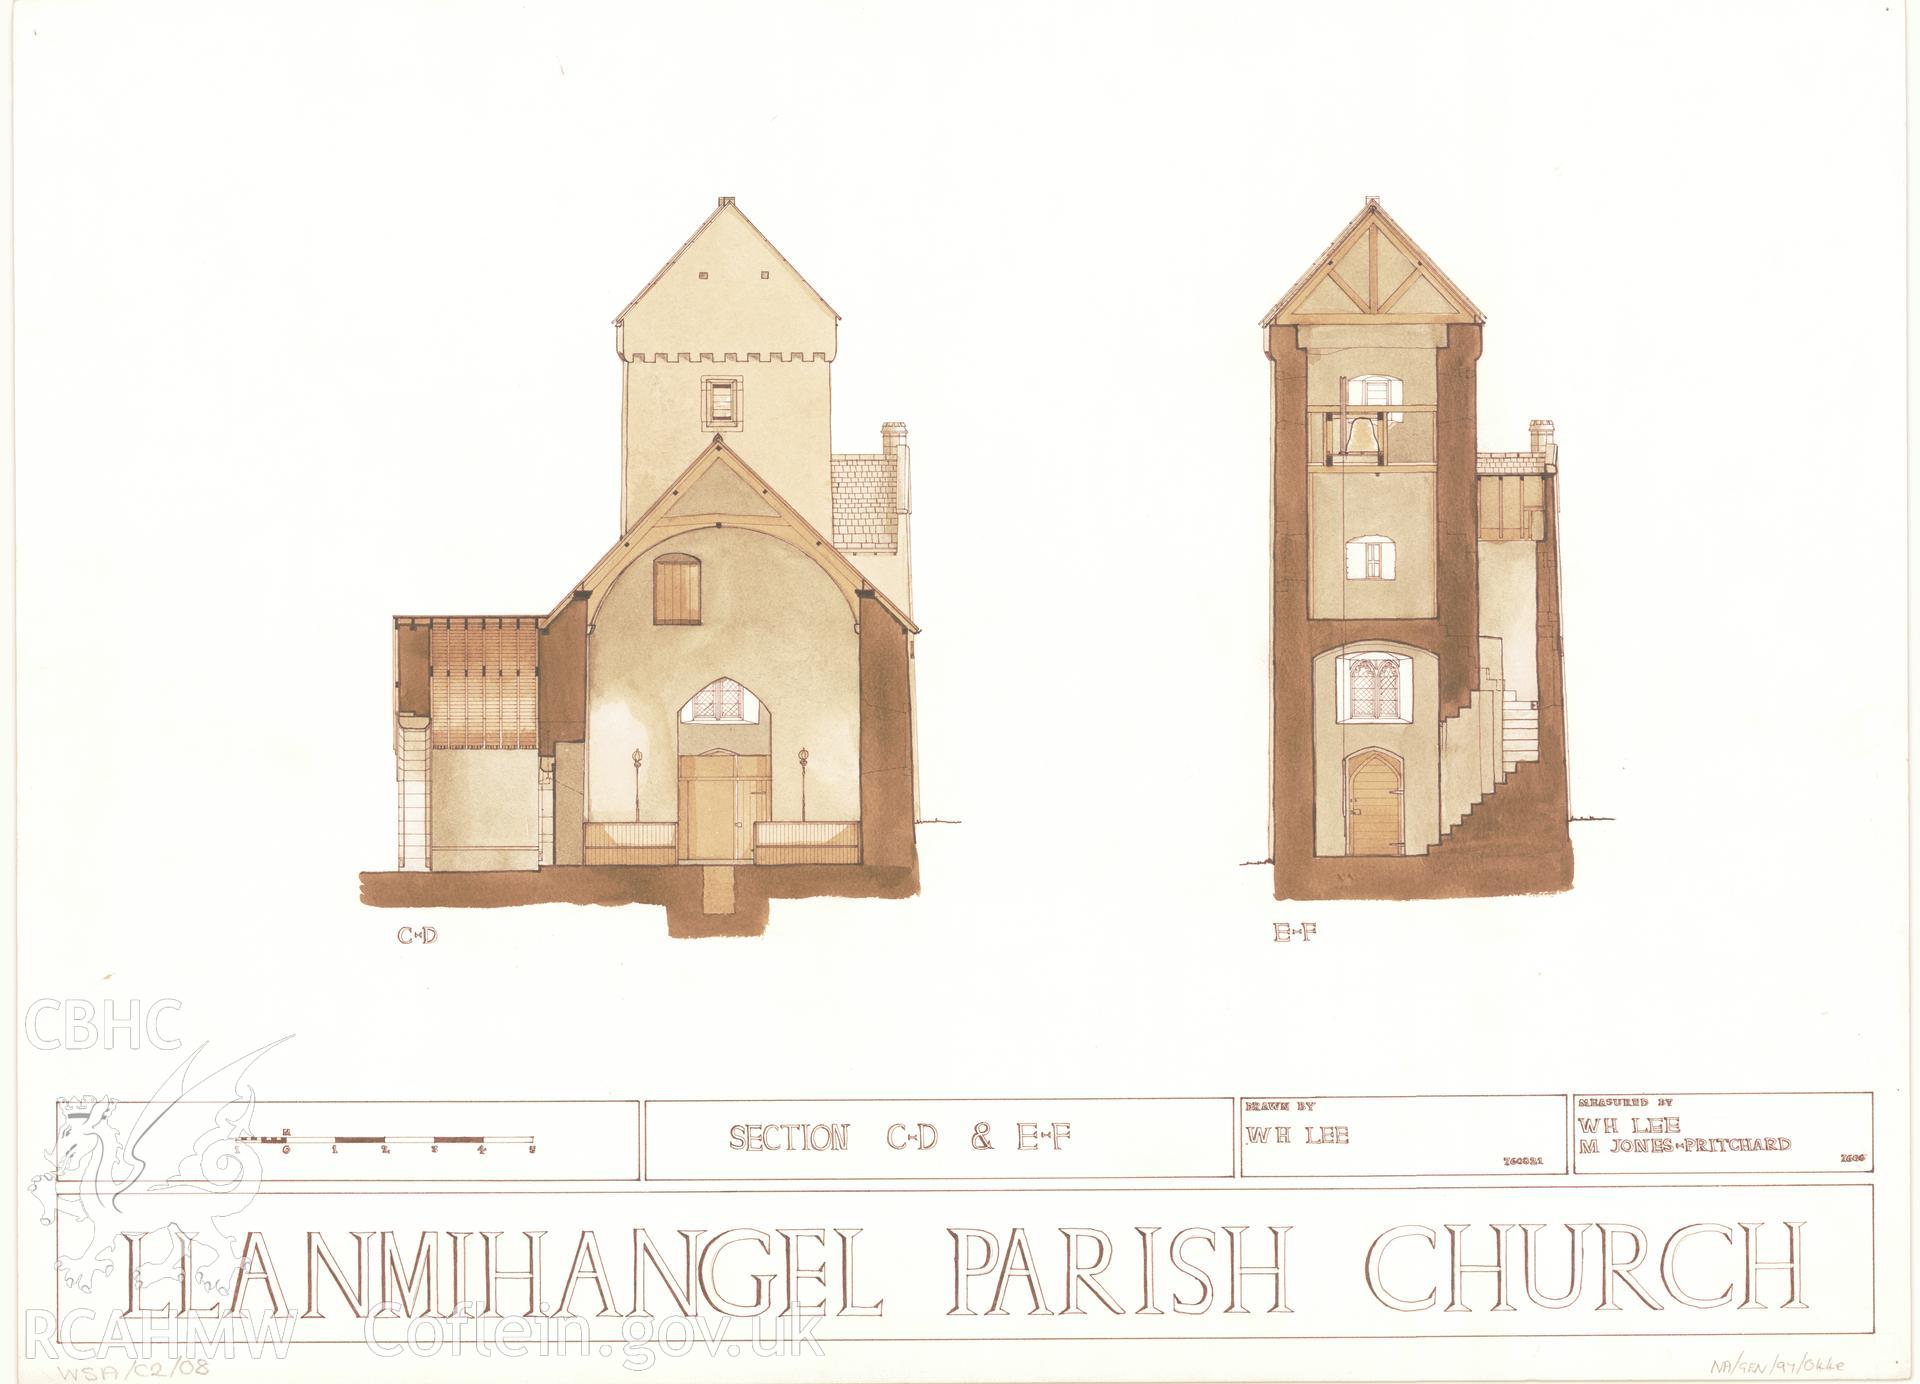 Measured drawing showing section views of Llanmihangel Parish Church, produced by M. Jones-Pritchard and W.H. Lee, 1976.